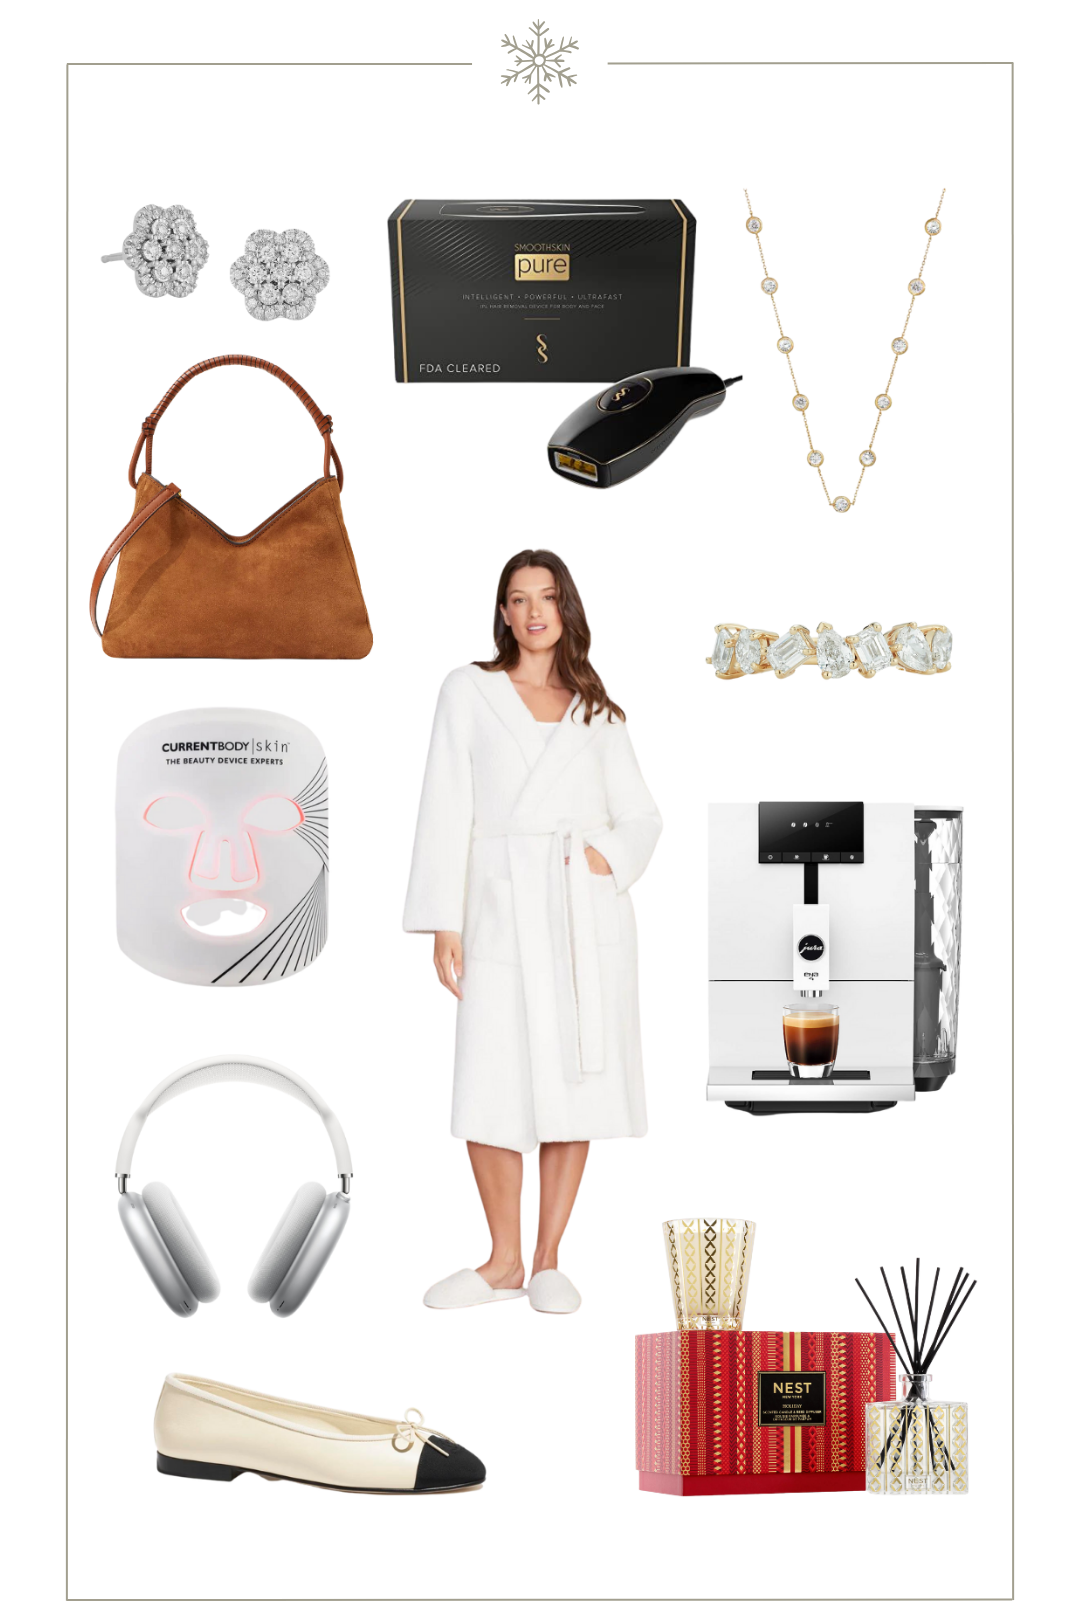 36 Thank-You Gifts For Women: Make Them Feel Wonderful!